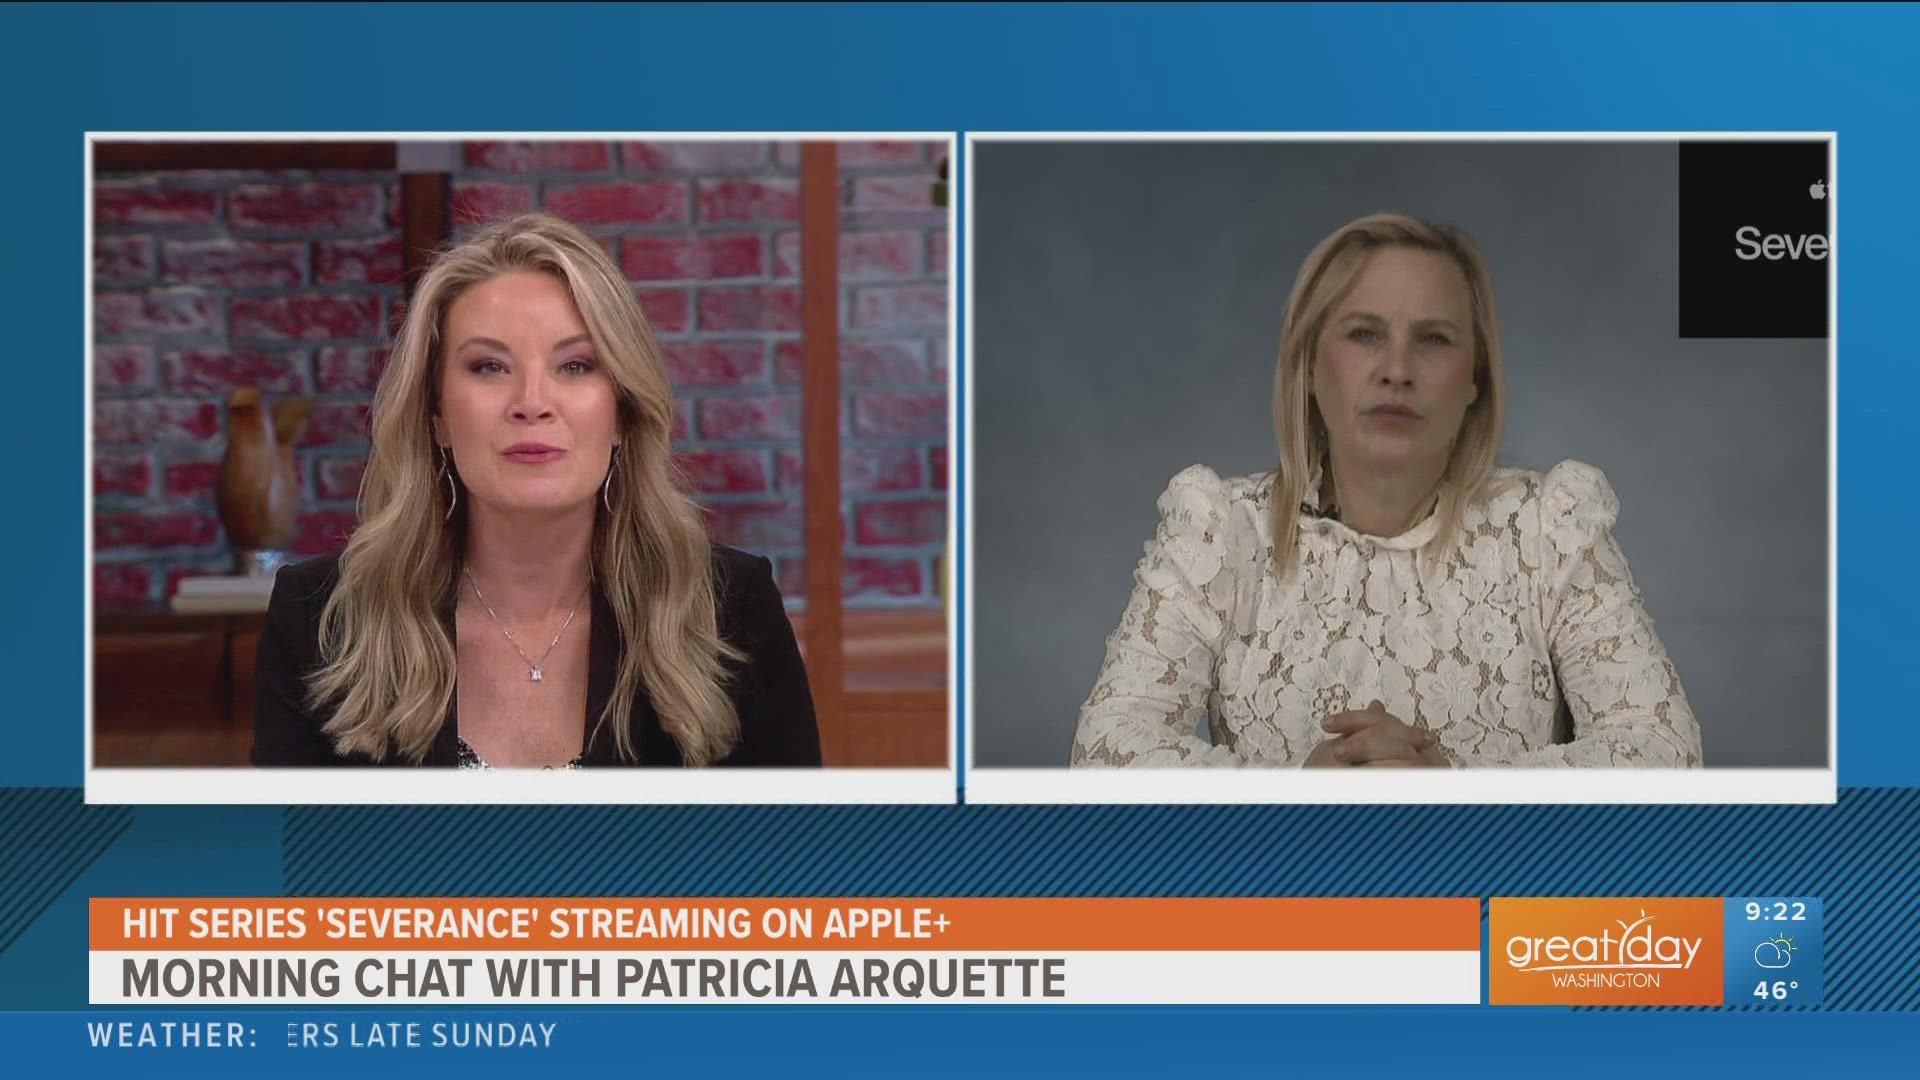 Kristen talks to Academy Award-winning actress Patricia Arquette talks about filming the popular thriller series 'Severance" that is streaming on Apple+.